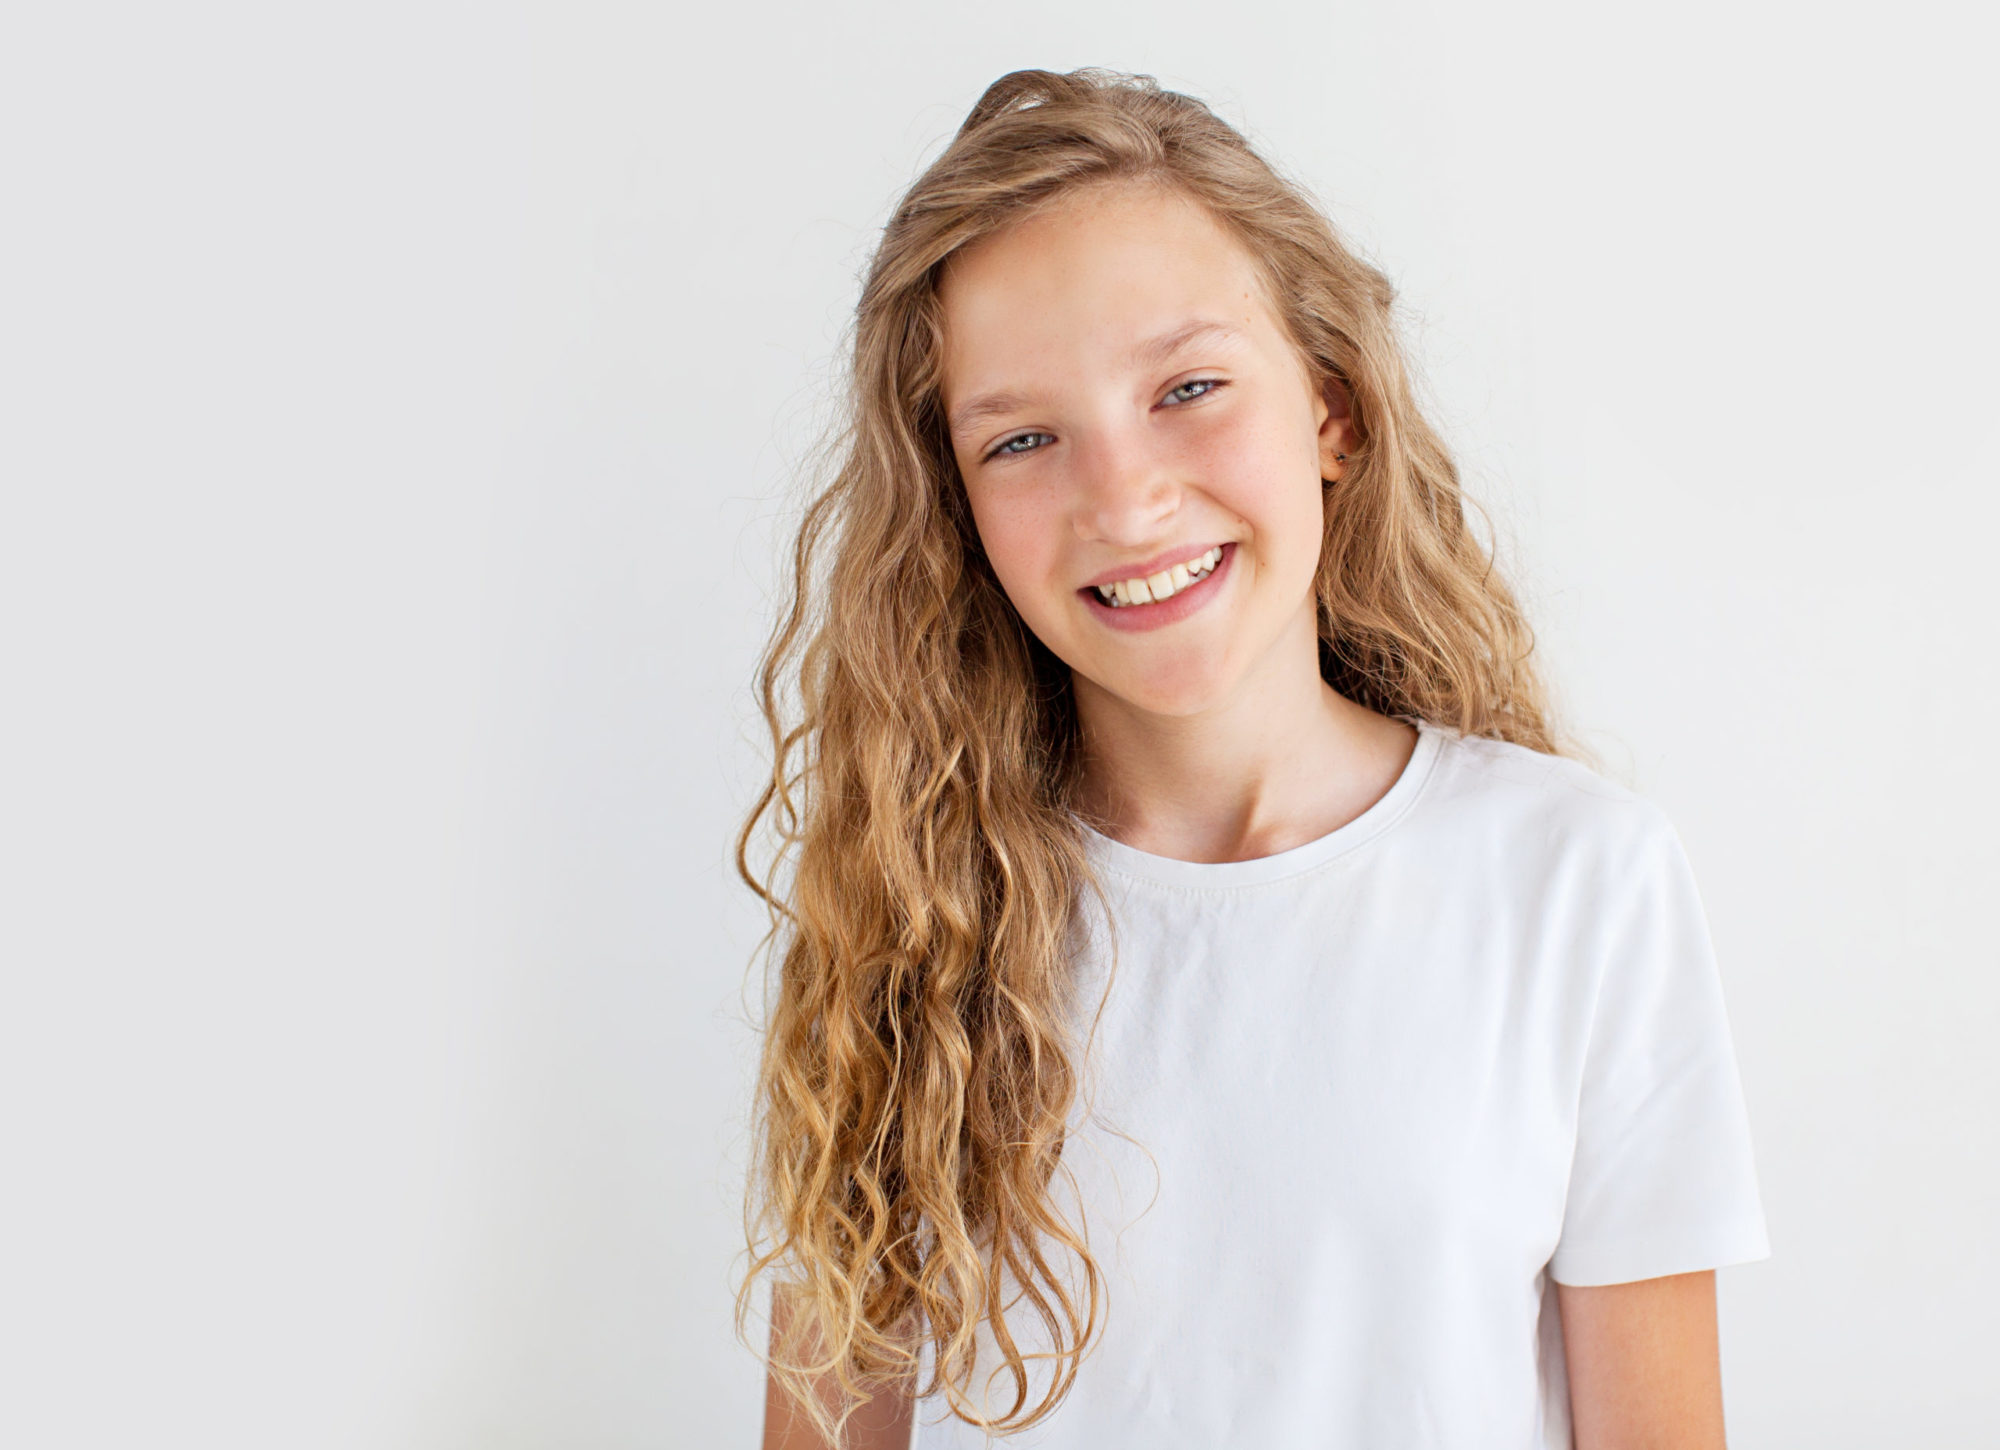 Portrait smiling young girl. Teen at white background